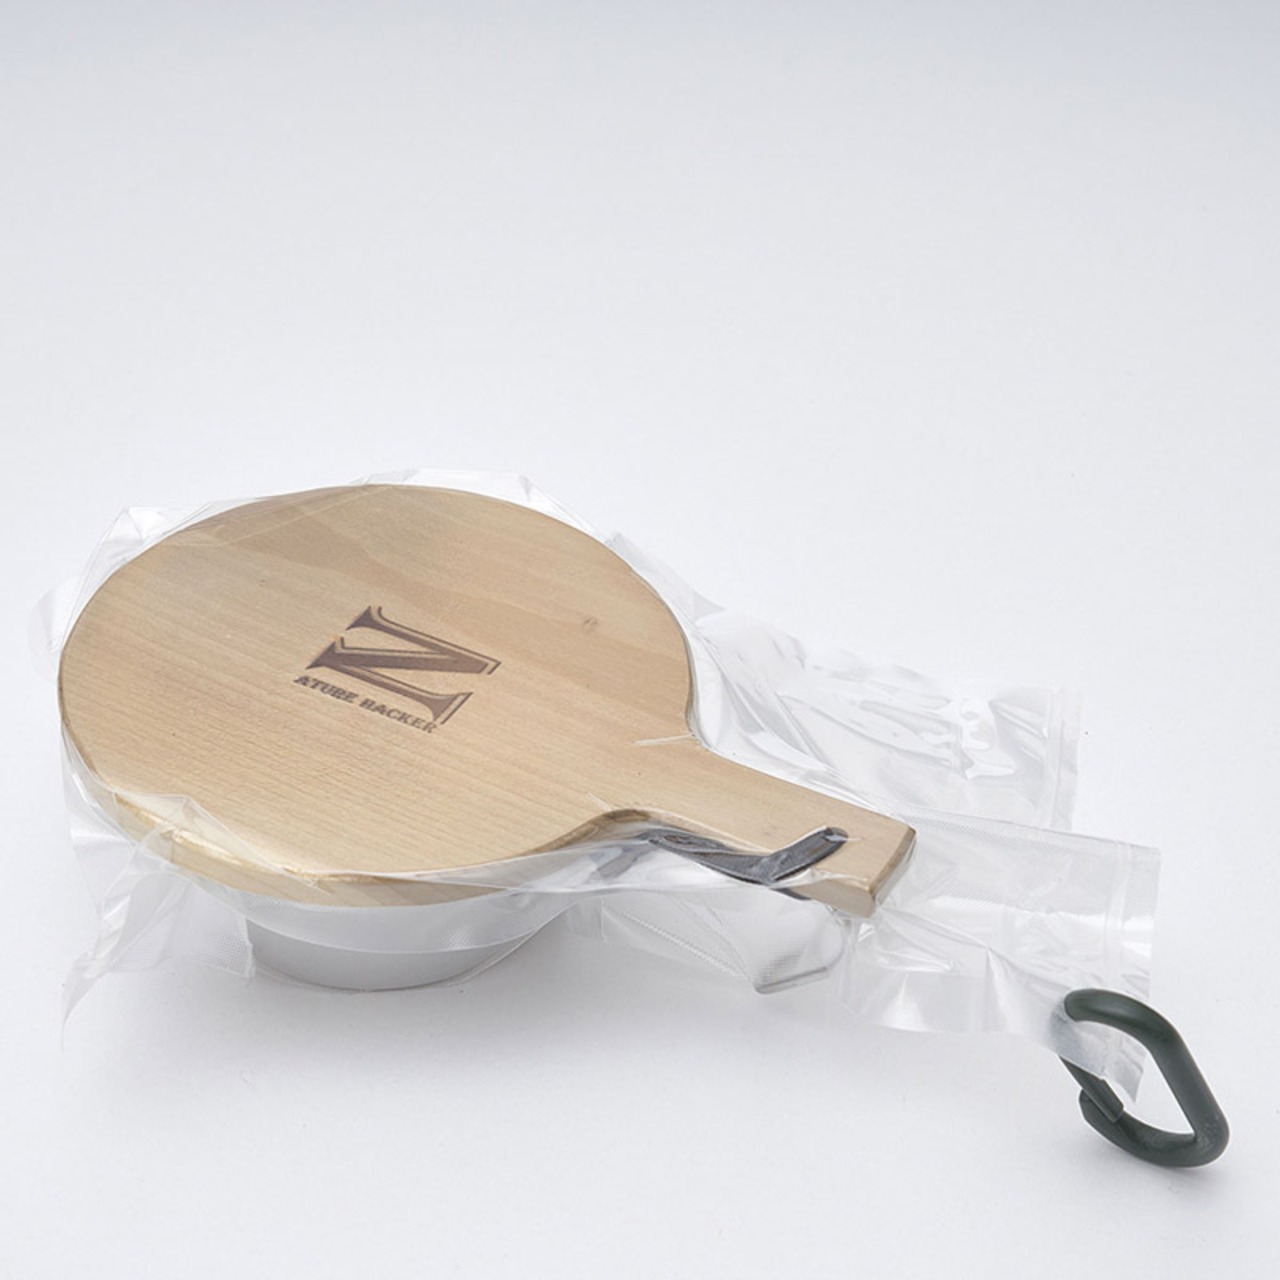 efim ( エフィム ) NATURE HACKER SIERRACUP WITH LID NHSCL-1 シェラカップ